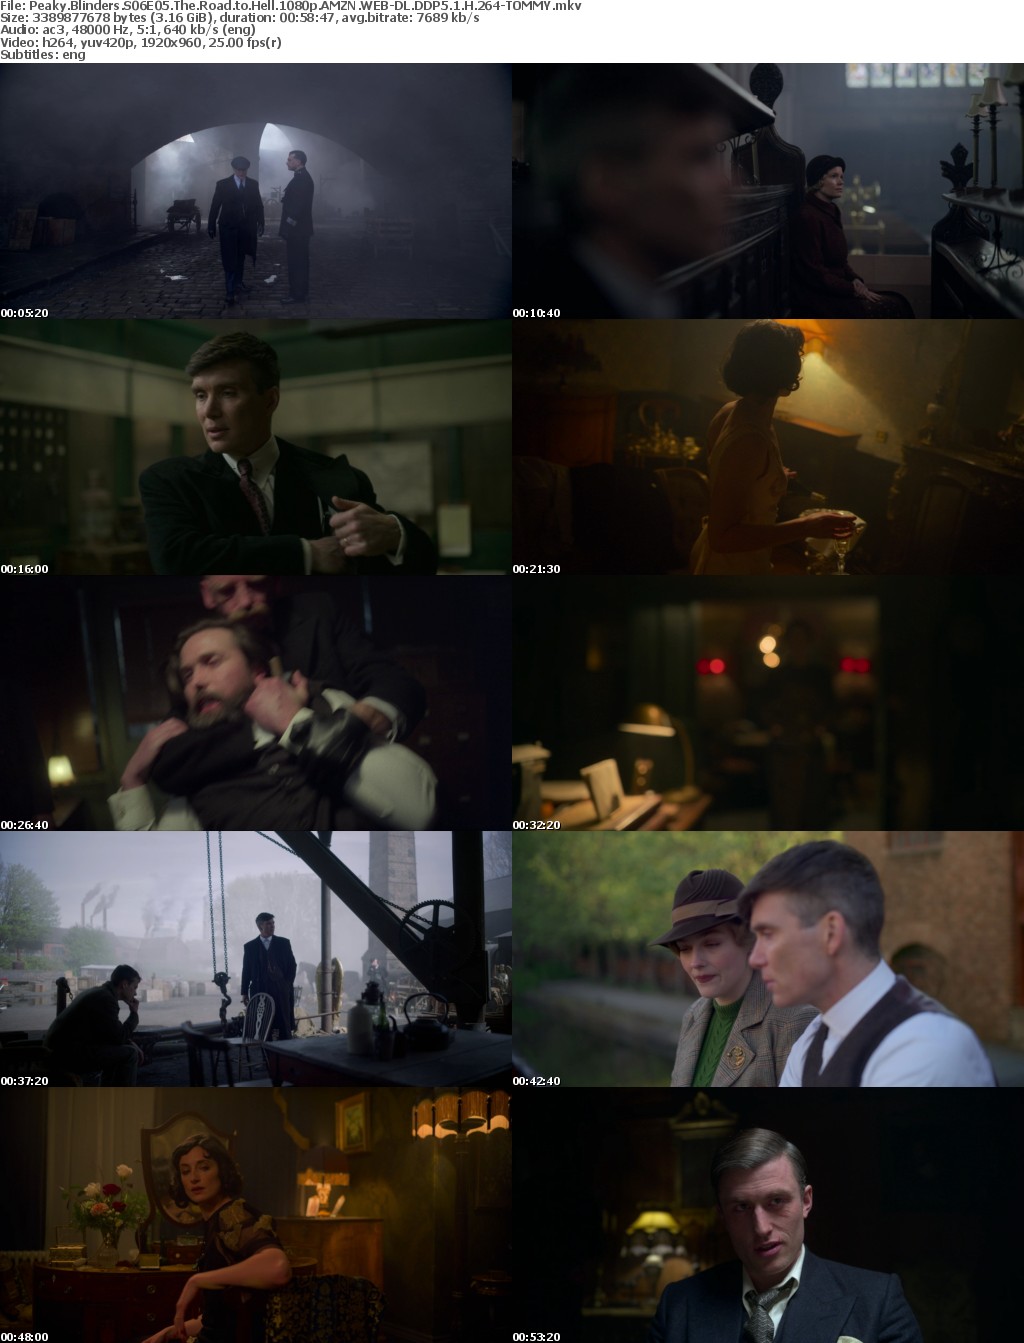 Peaky Blinders S06E05 The Road to Hell 1080p AMZN WEBRip DDP5 1 x264-TOMMY